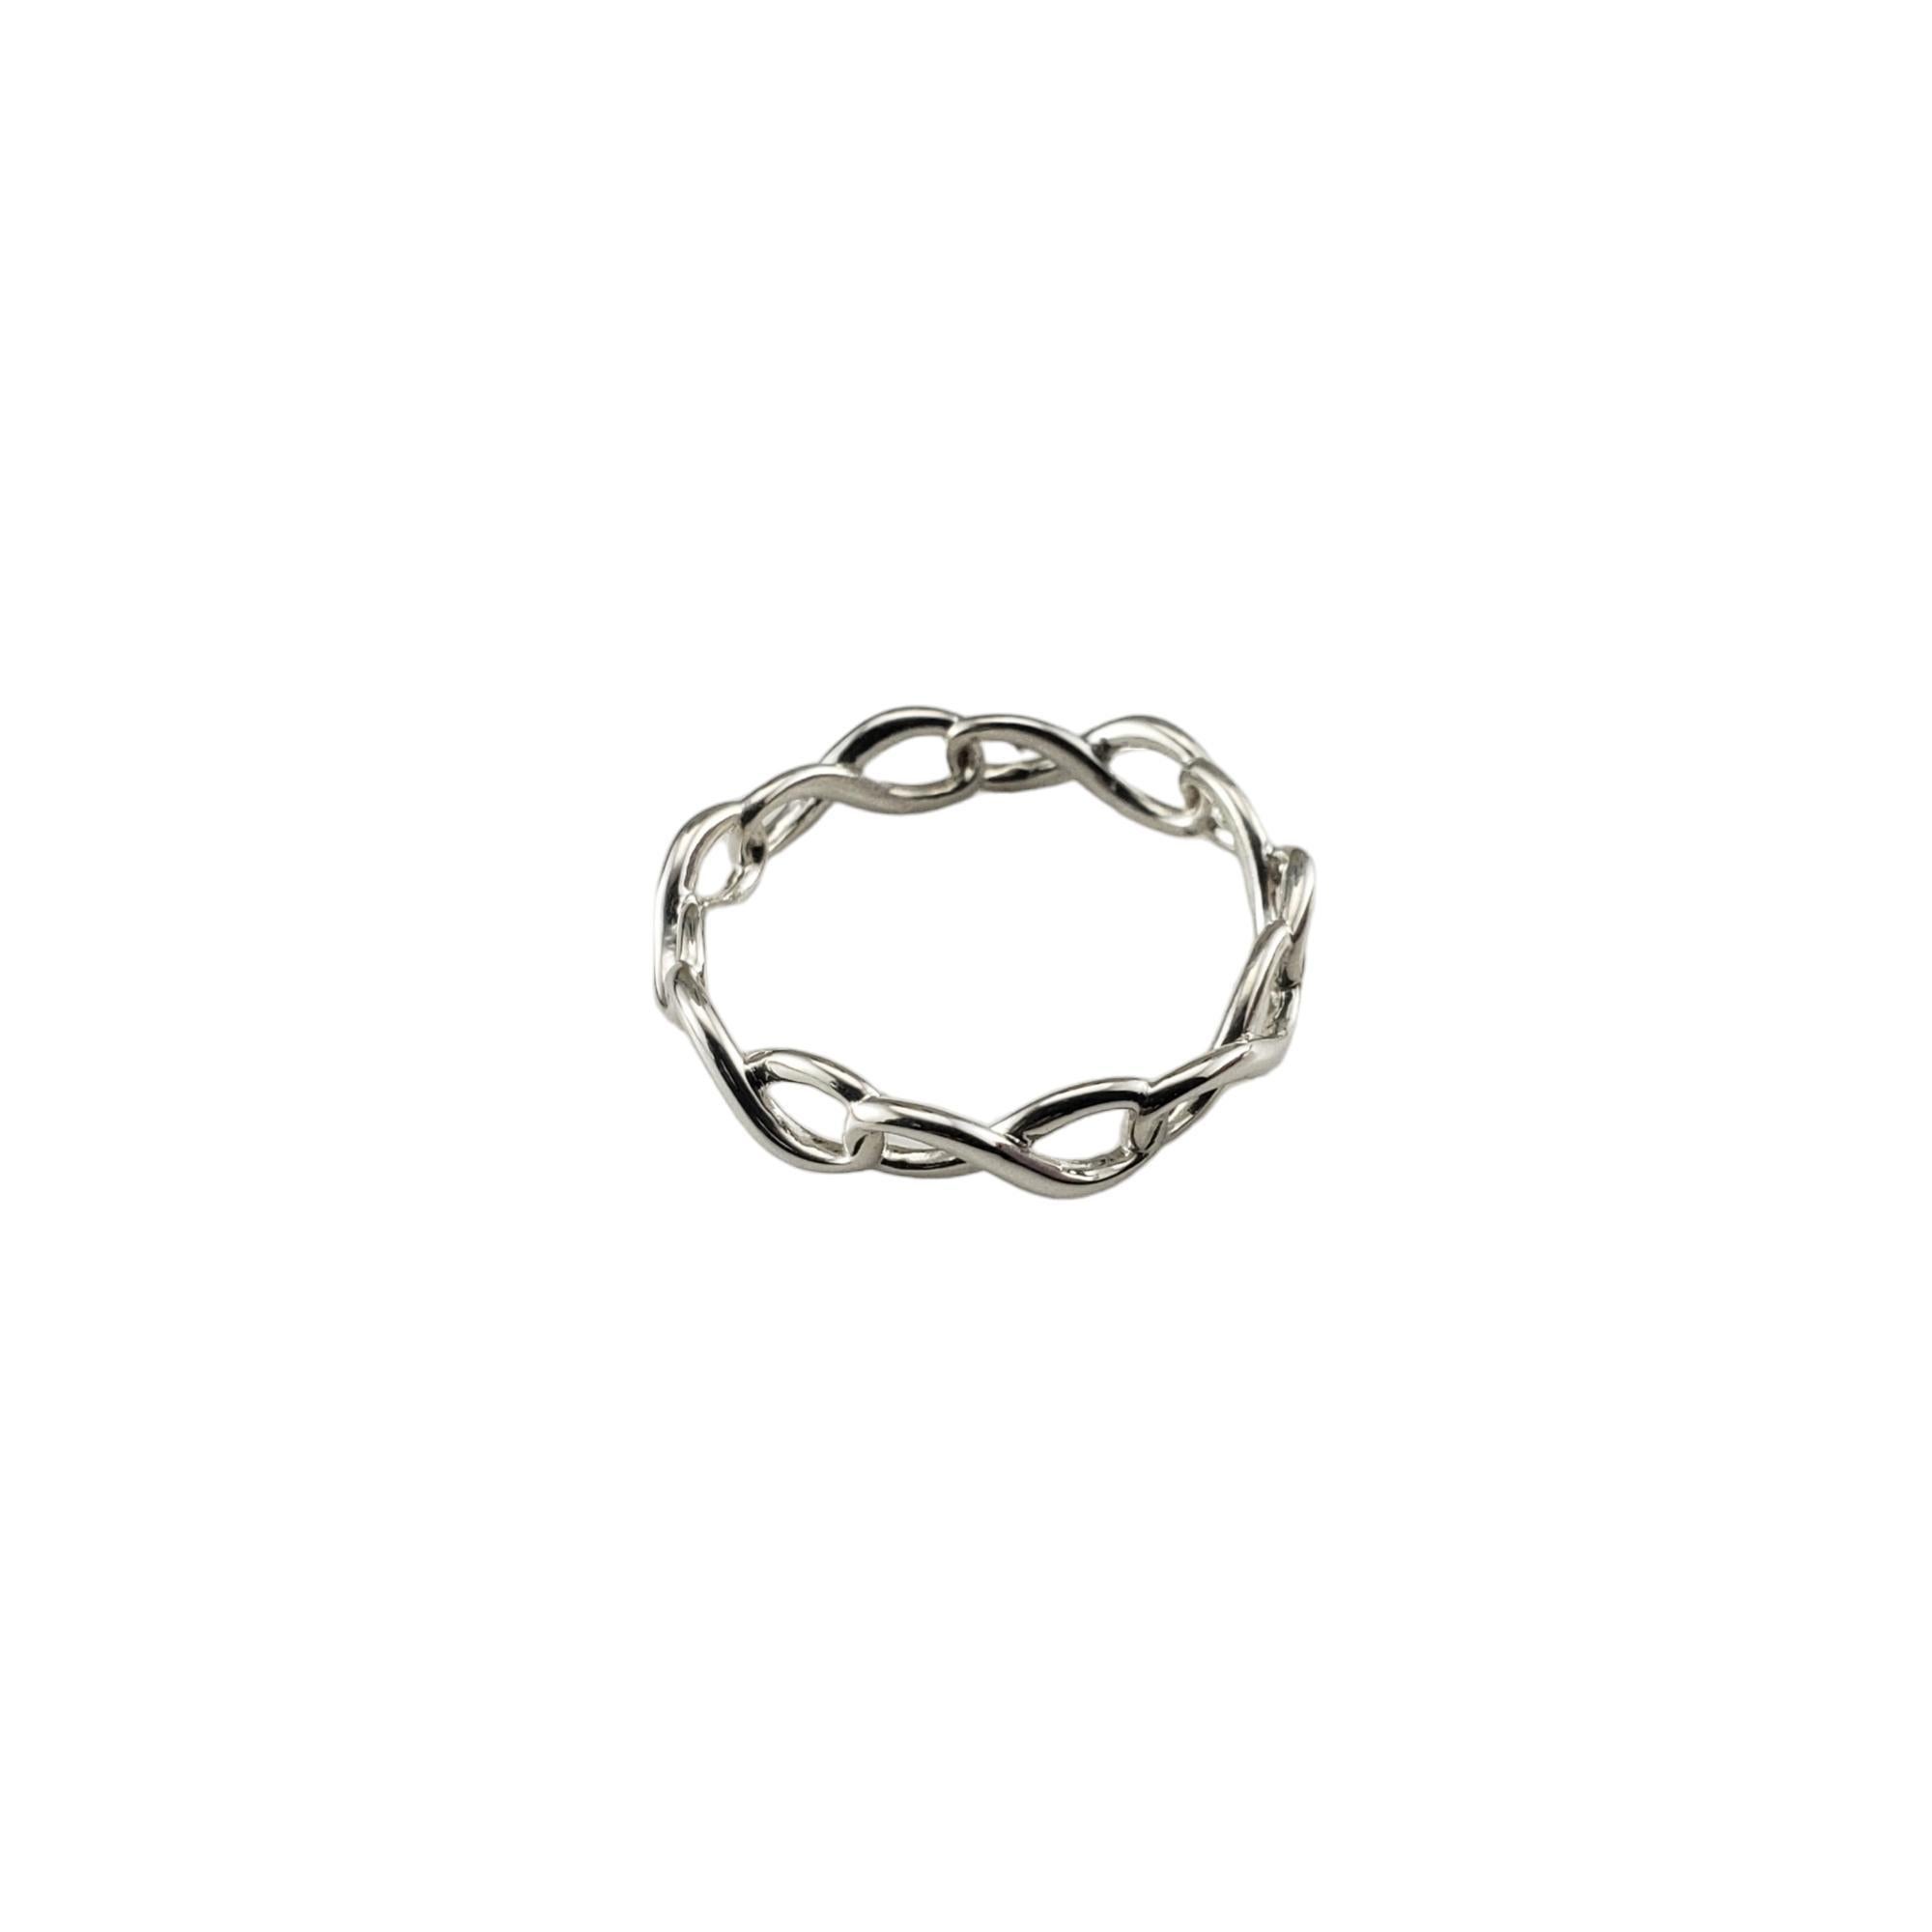 Women's Tiffany & Co. Sterling Silver Infinity Band Ring Size 8-8.25 #16244